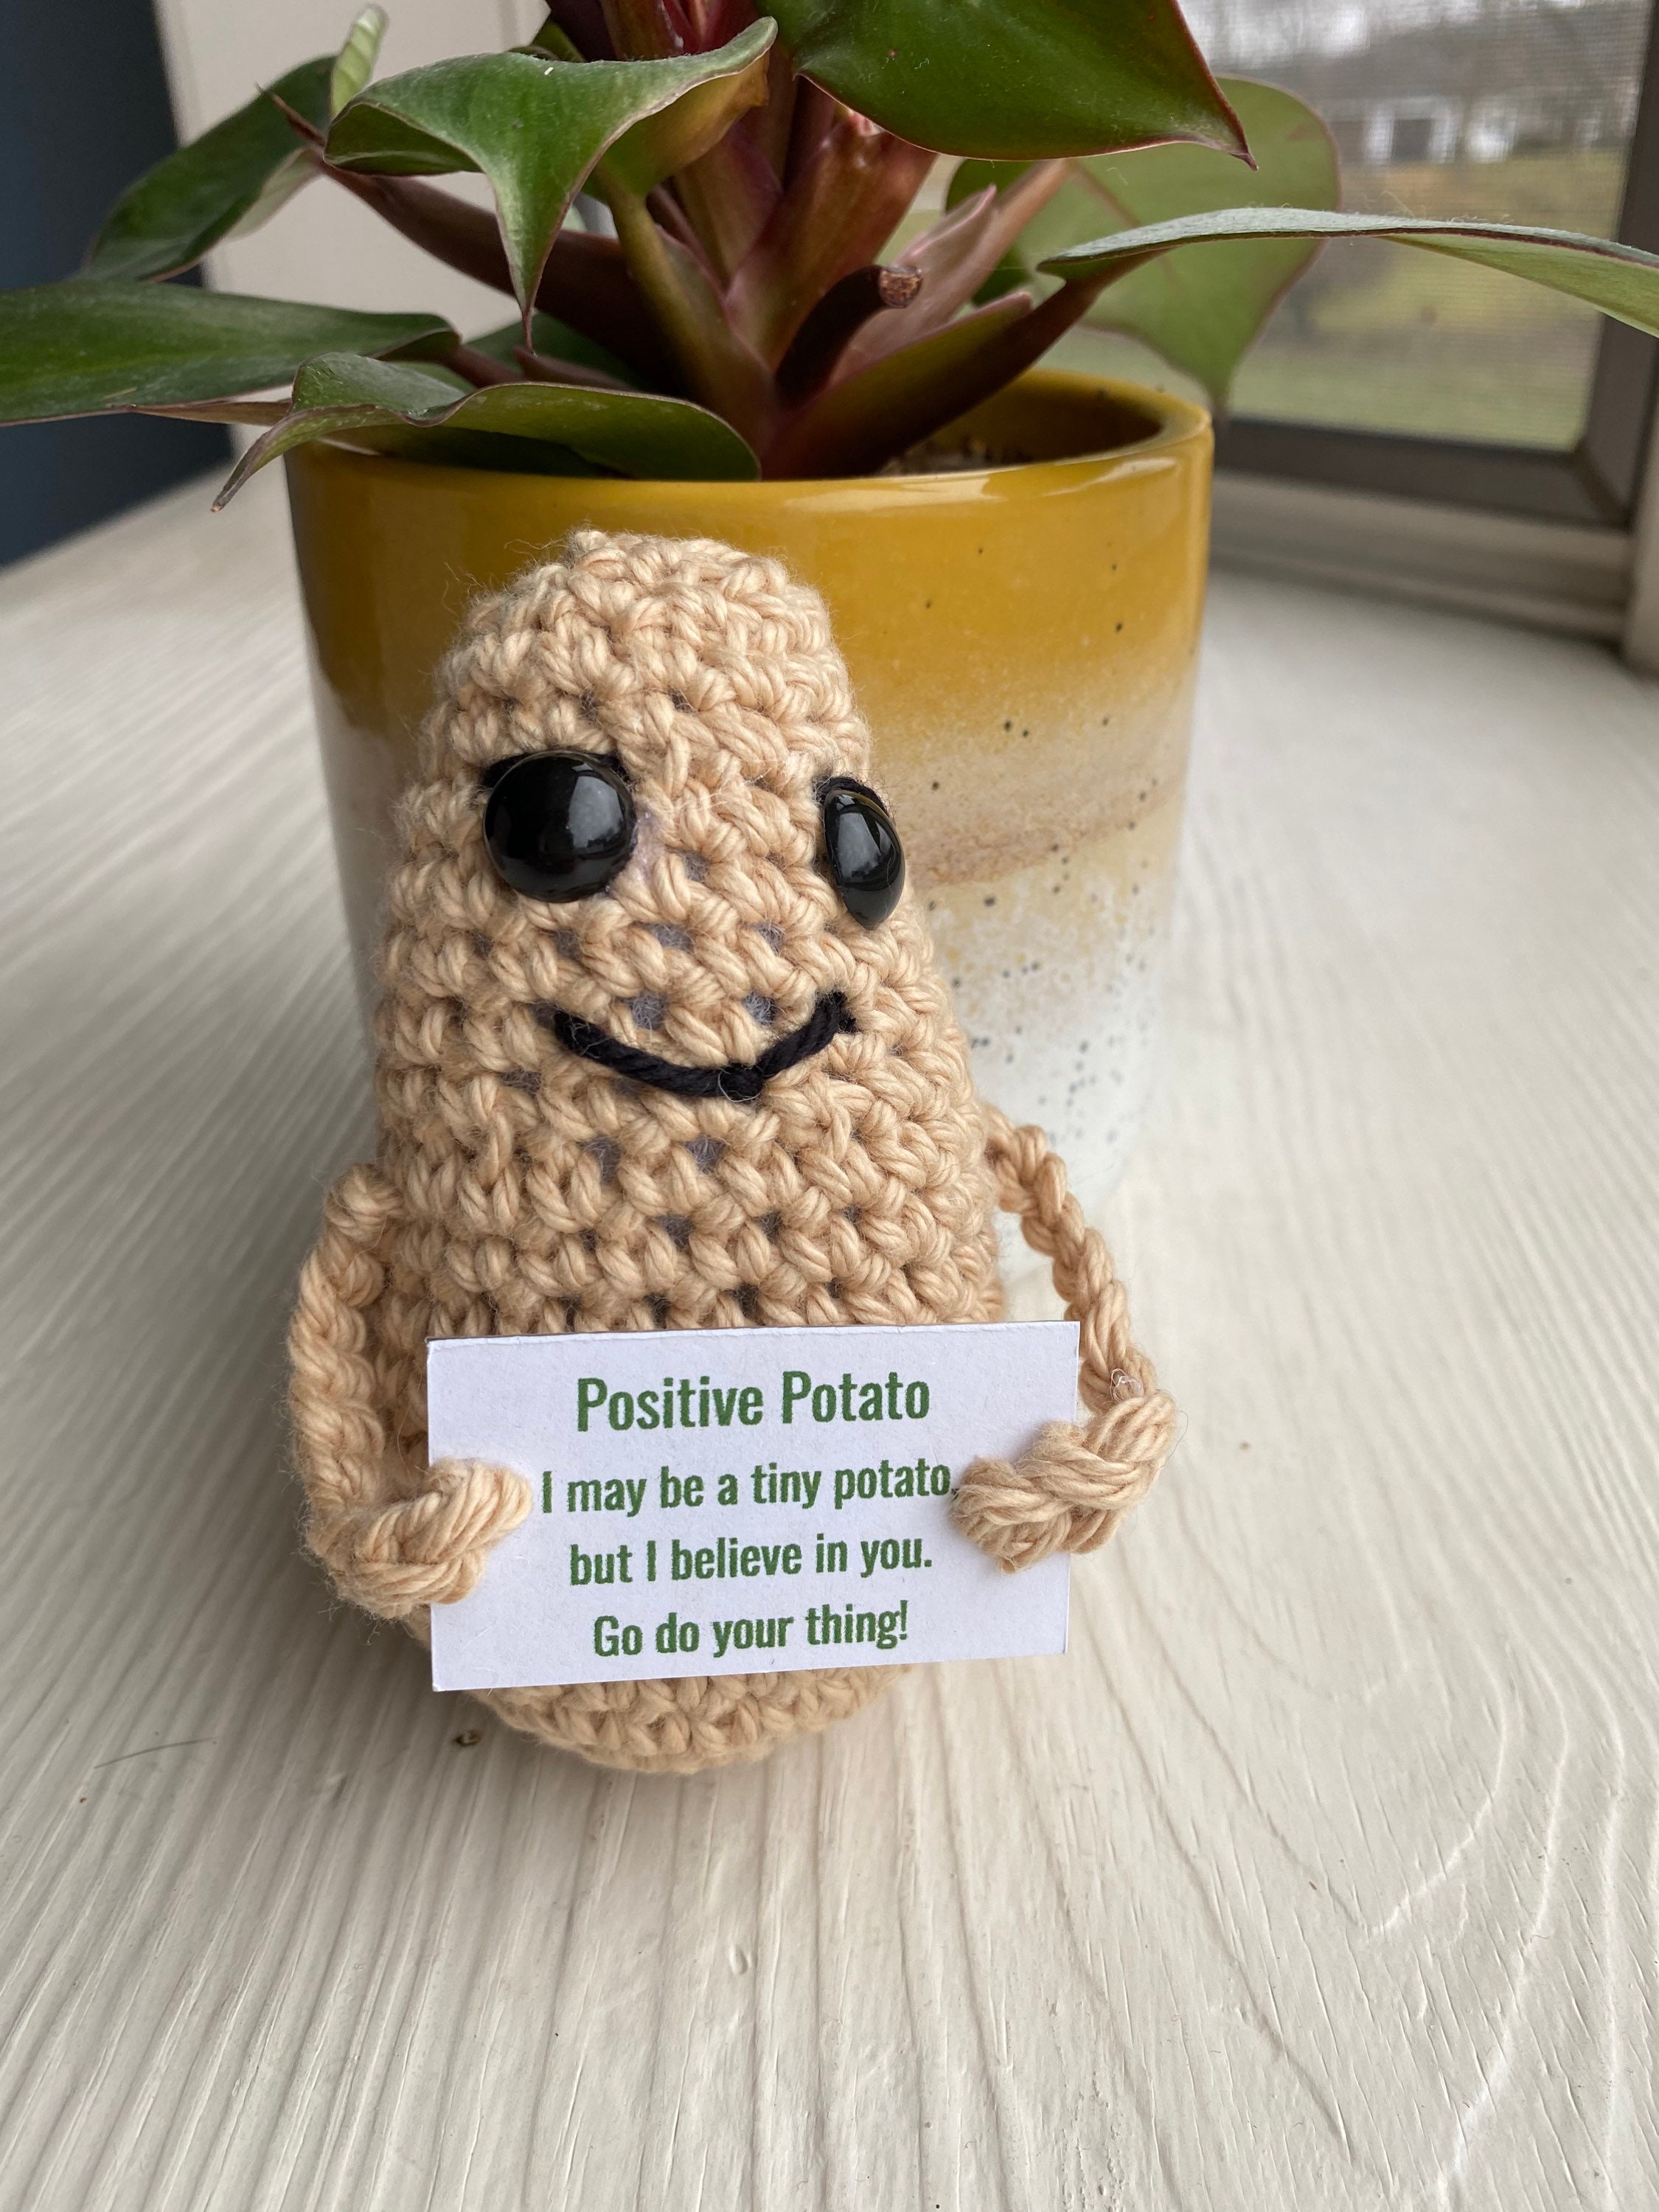  DICHA Positive Potato Bulk-Spreading Joy and Good Vibes - Cute  and Funny Emotional Support Gift for Friends Party Decoration  Encouragement-No Glue and Washable-Beige (3Pack) : Arts, Crafts & Sewing